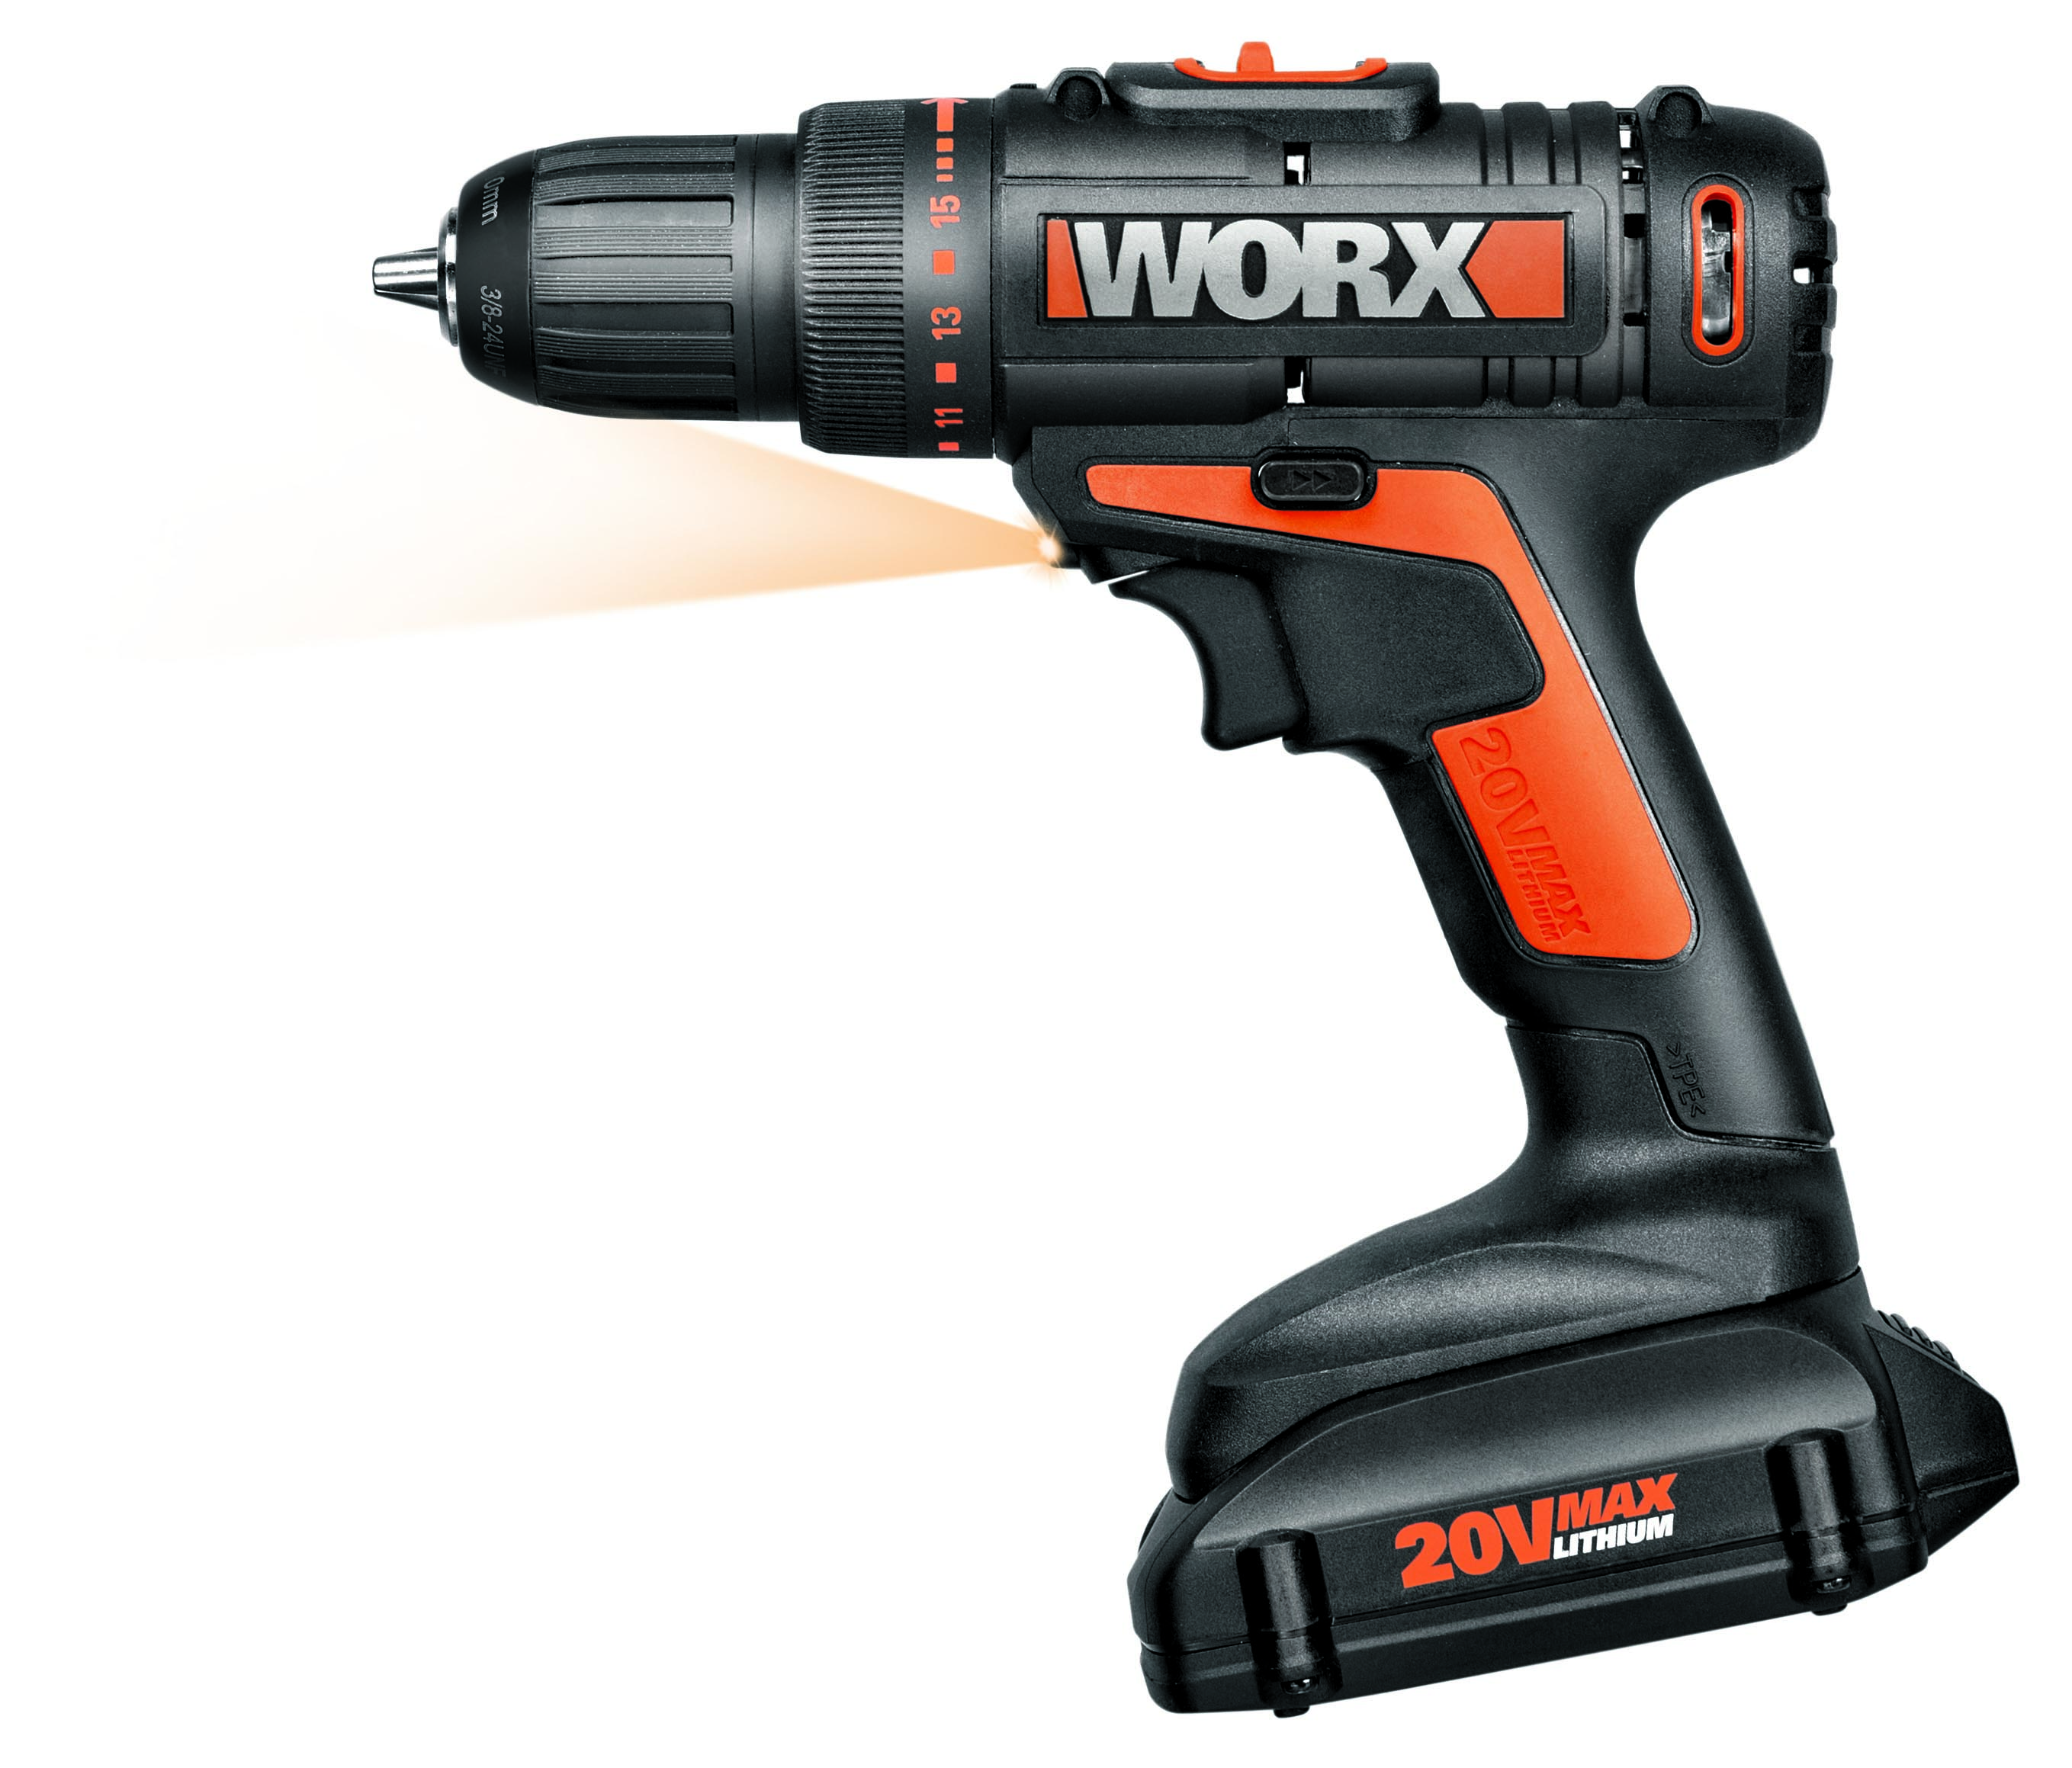 WORX 20V Drill-Driver features 2-speed gearbox and 15+1 clutch positions to handle a wide range of drilling and driving applications.